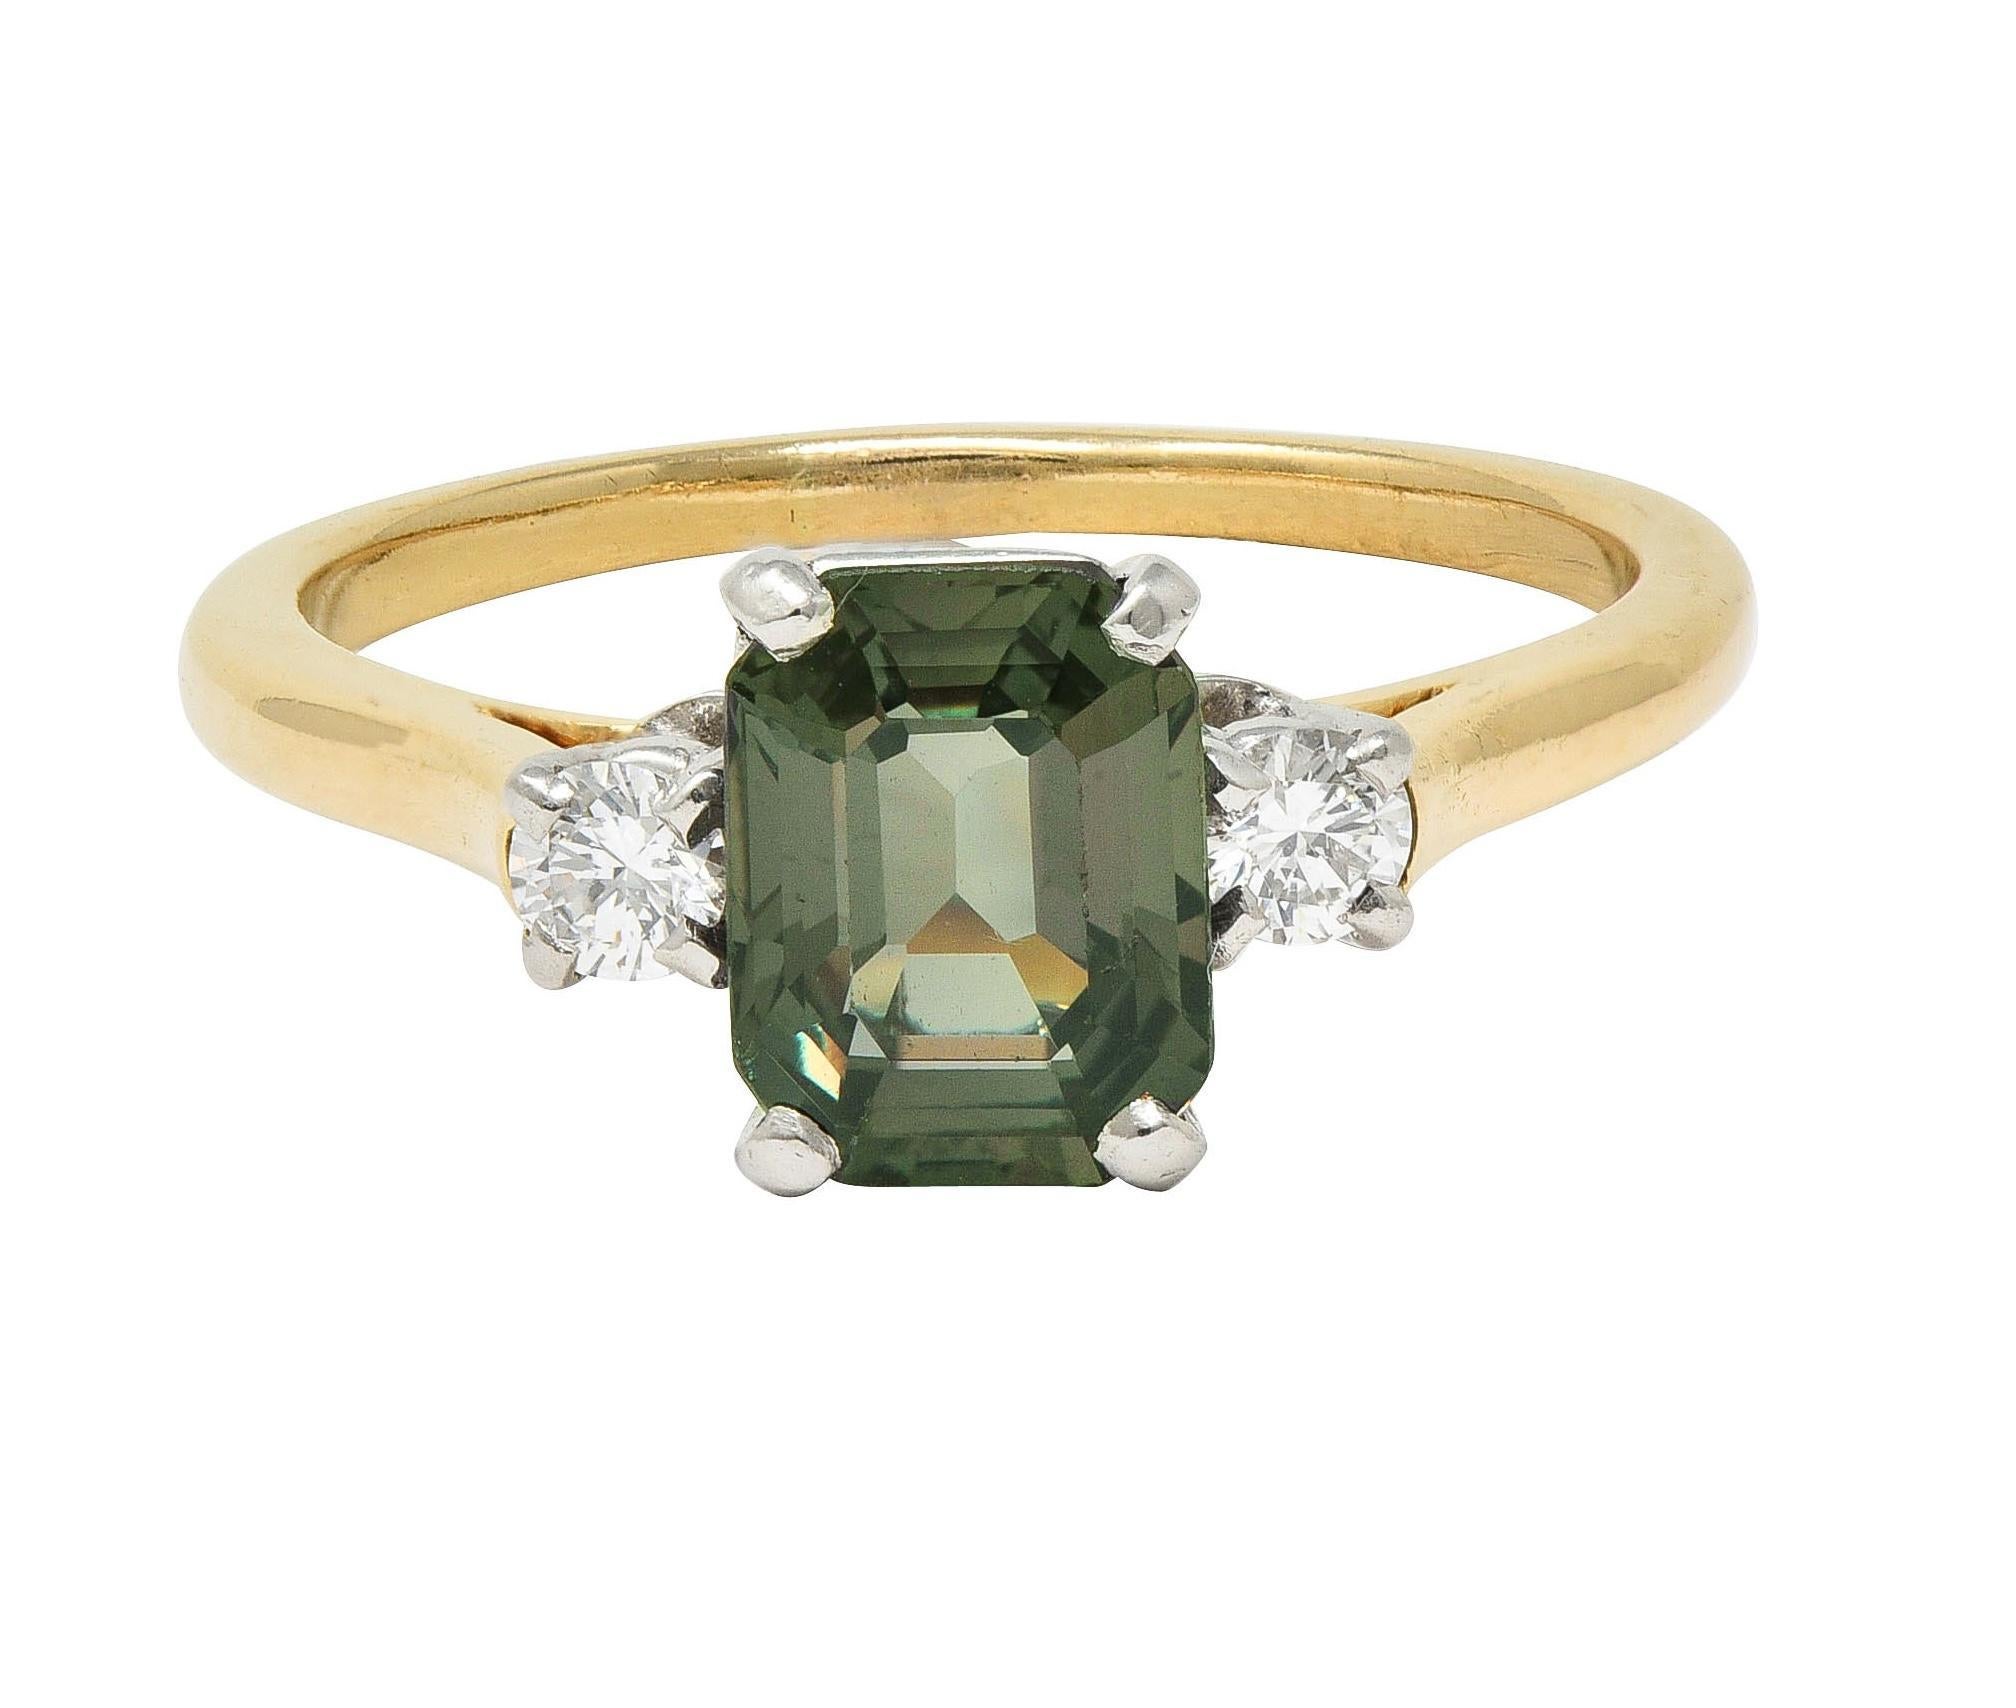 Centering an emerald cut alexandrite weighing approximately 1.50 carats total - transparent dark green
Displaying moderate color change to dark brownish red in incandescent light 
Flanked by round brilliant cut diamonds - each prong set in platinum